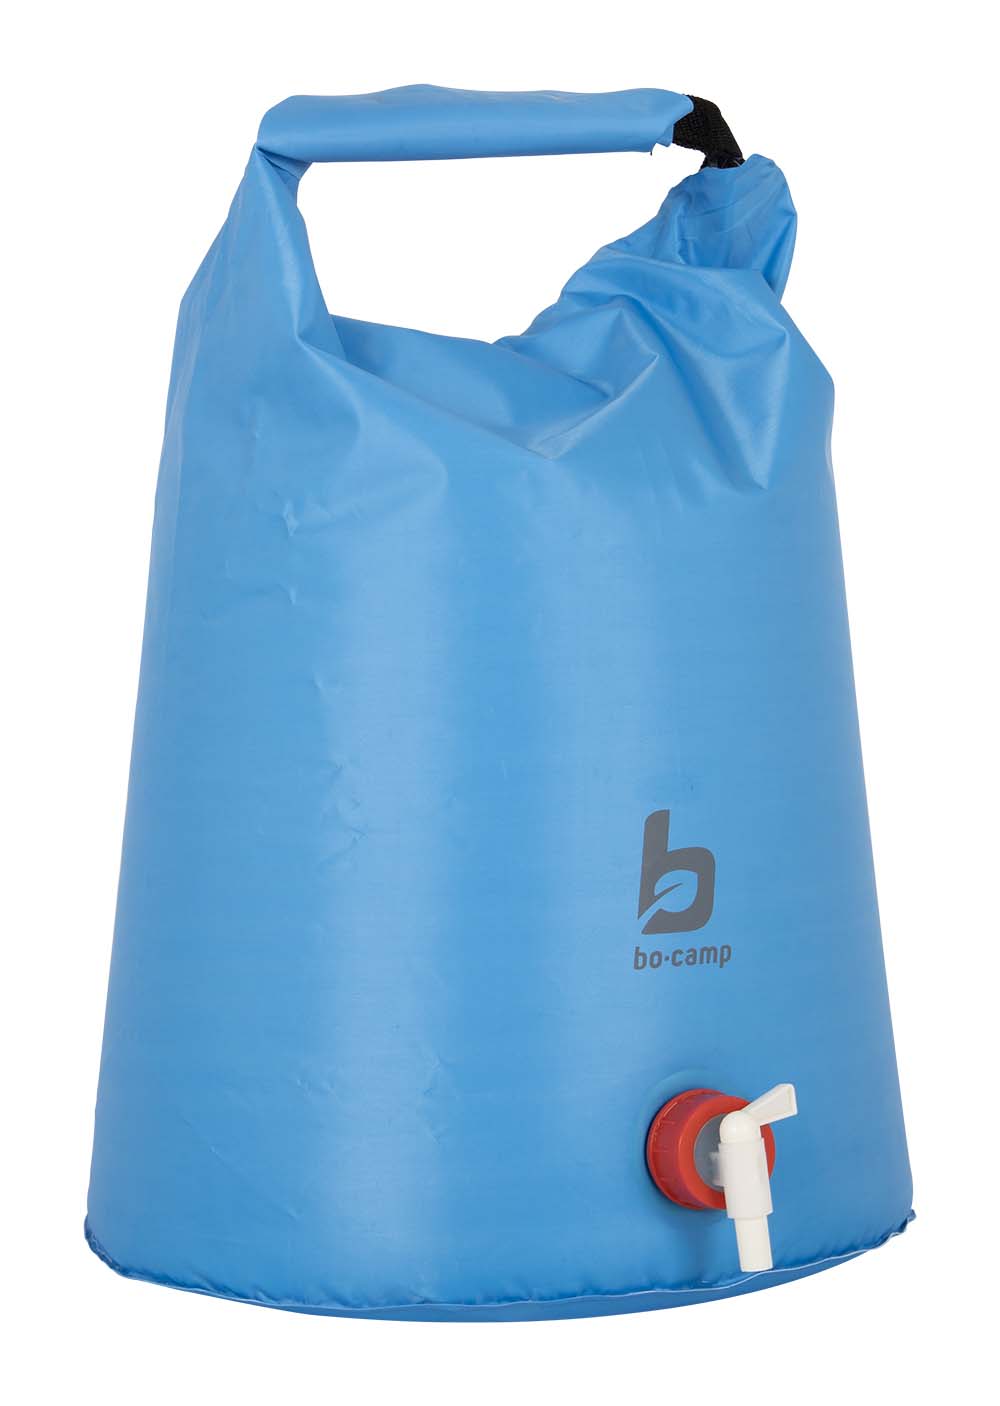 6681200 A sturdy flat folding aqua sac. Ideal for taking on the road or for use at the campsite. After use, the aqua sac can be compactly folded and stored. The water bag has a handy tap and handle at the top to transport the bag. Also the water bag is BPA free.